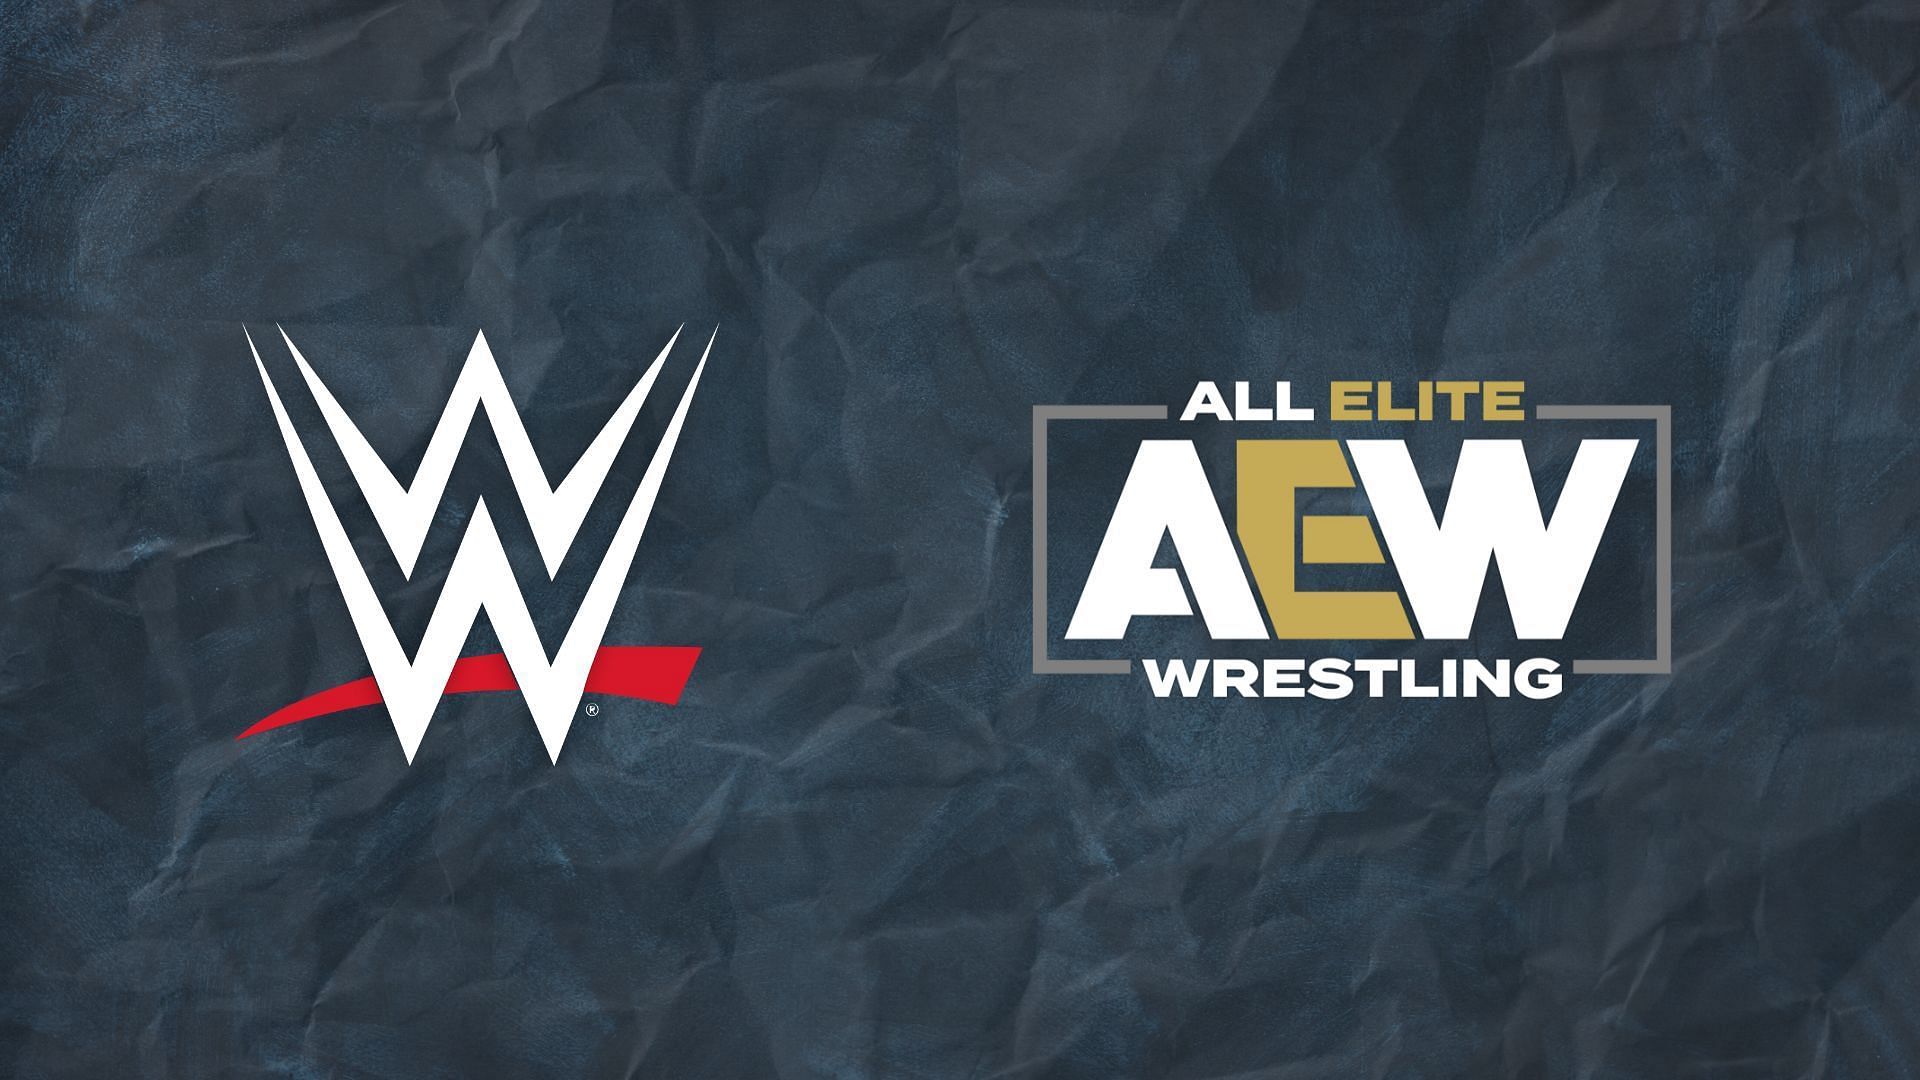 Both WWE and AEW produce three weekly Television shows